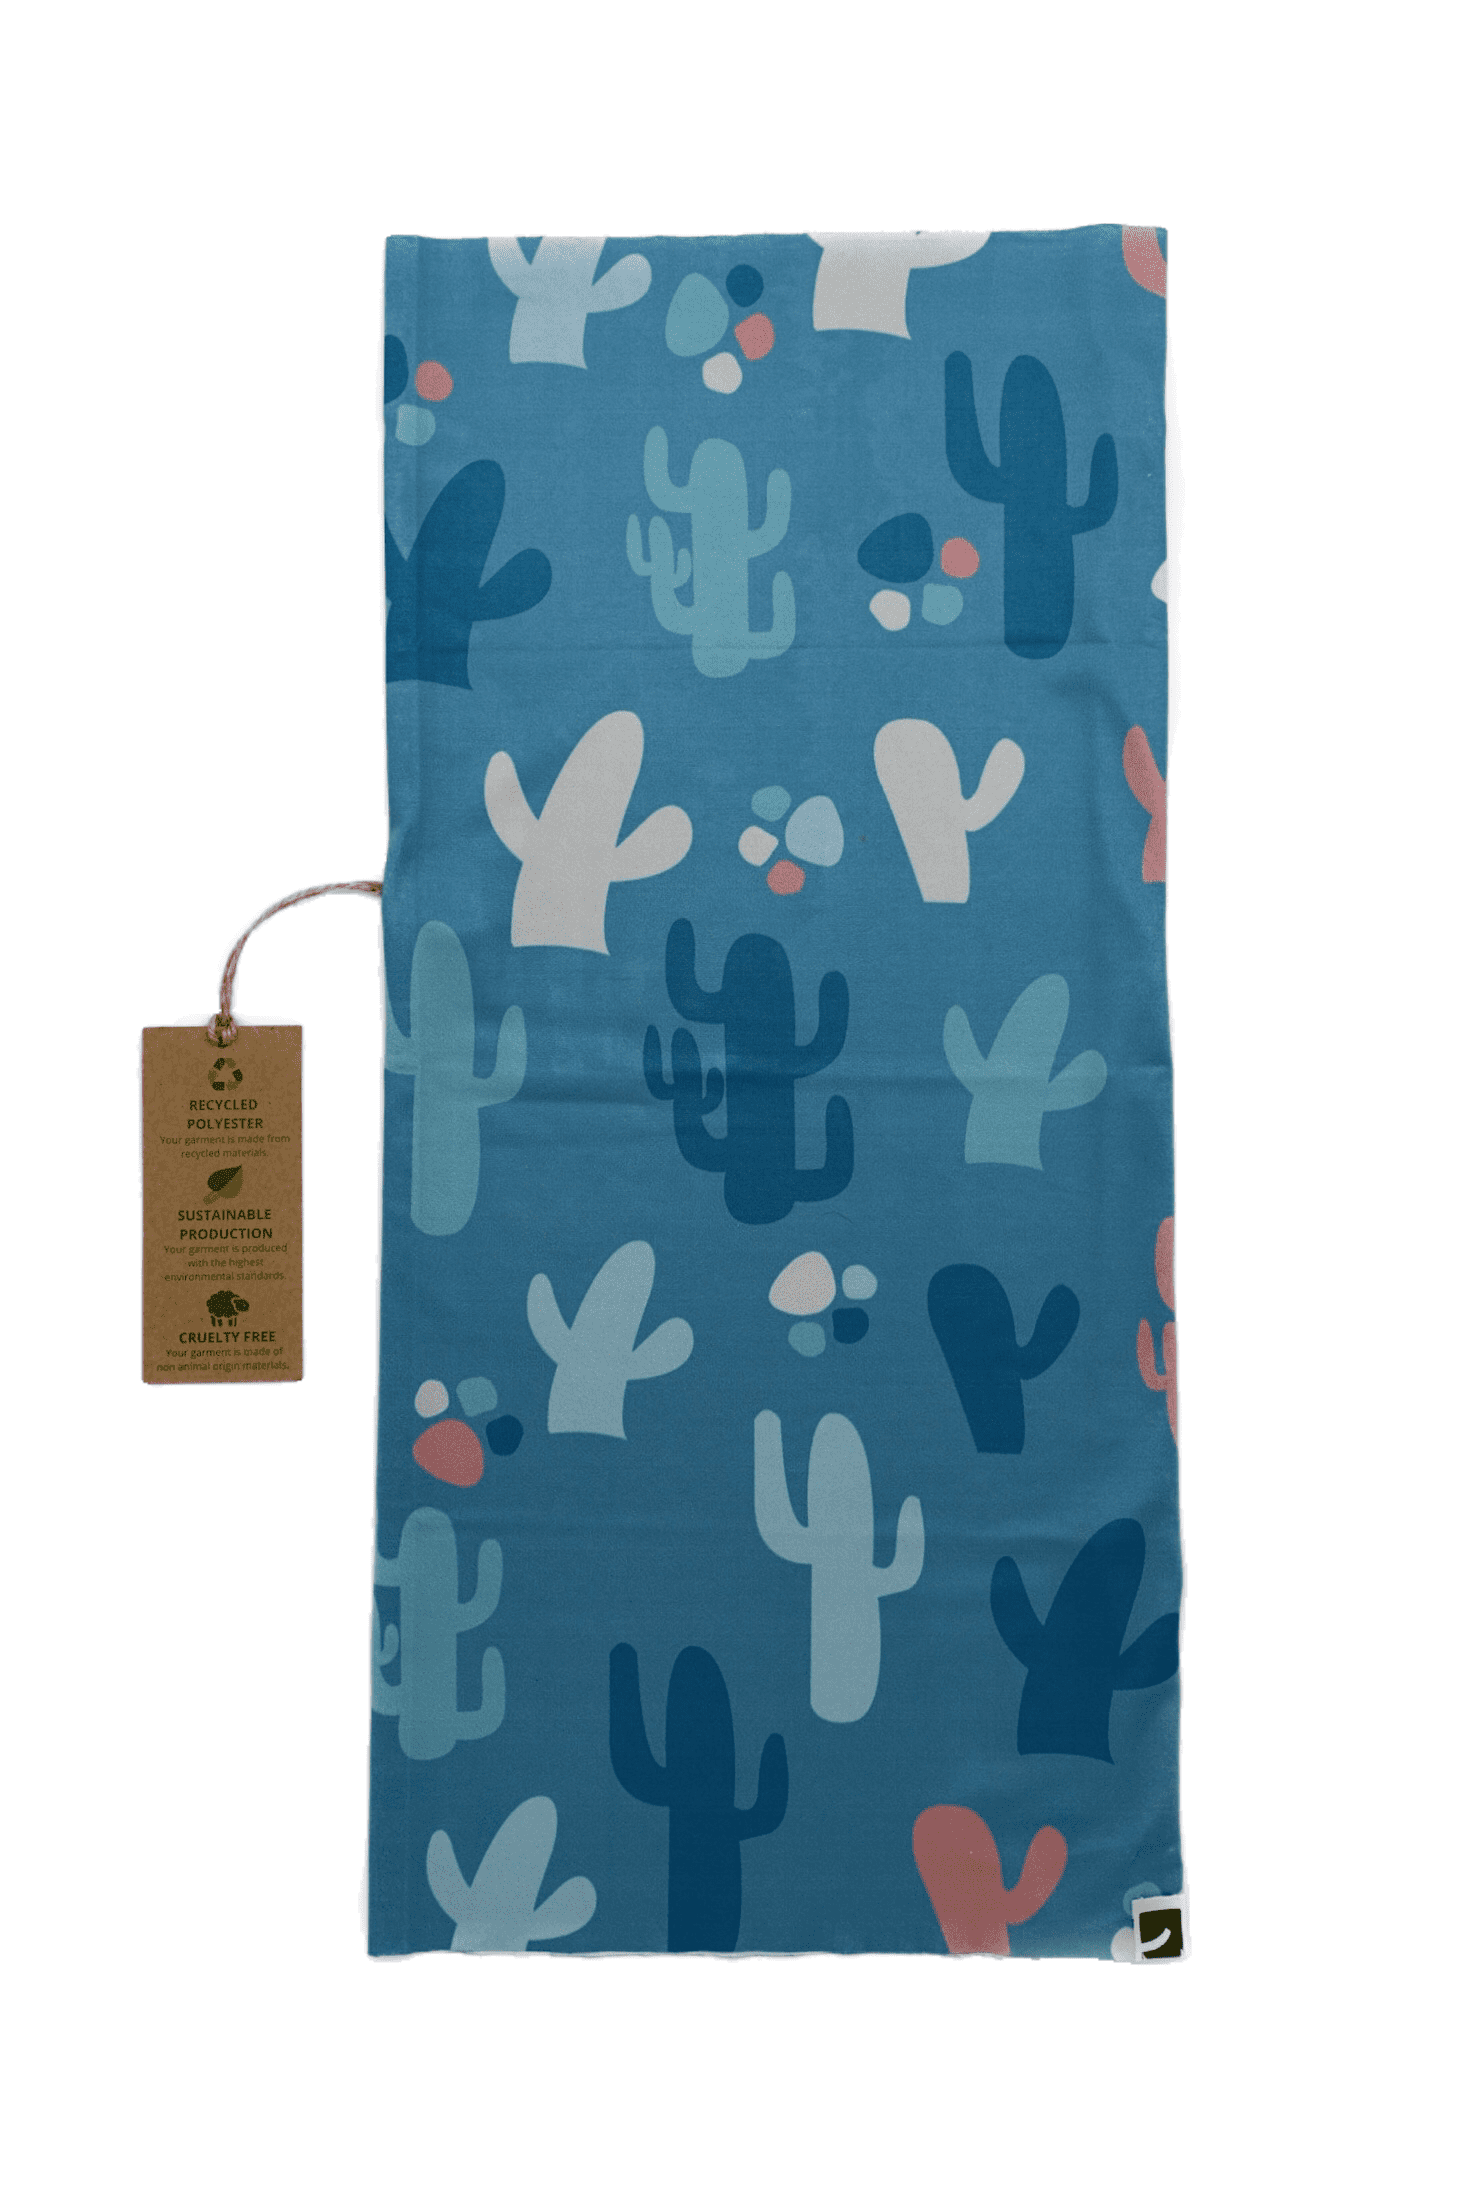 Bandana from recycled polyester with cactus pattern in blue - Scarf Designers